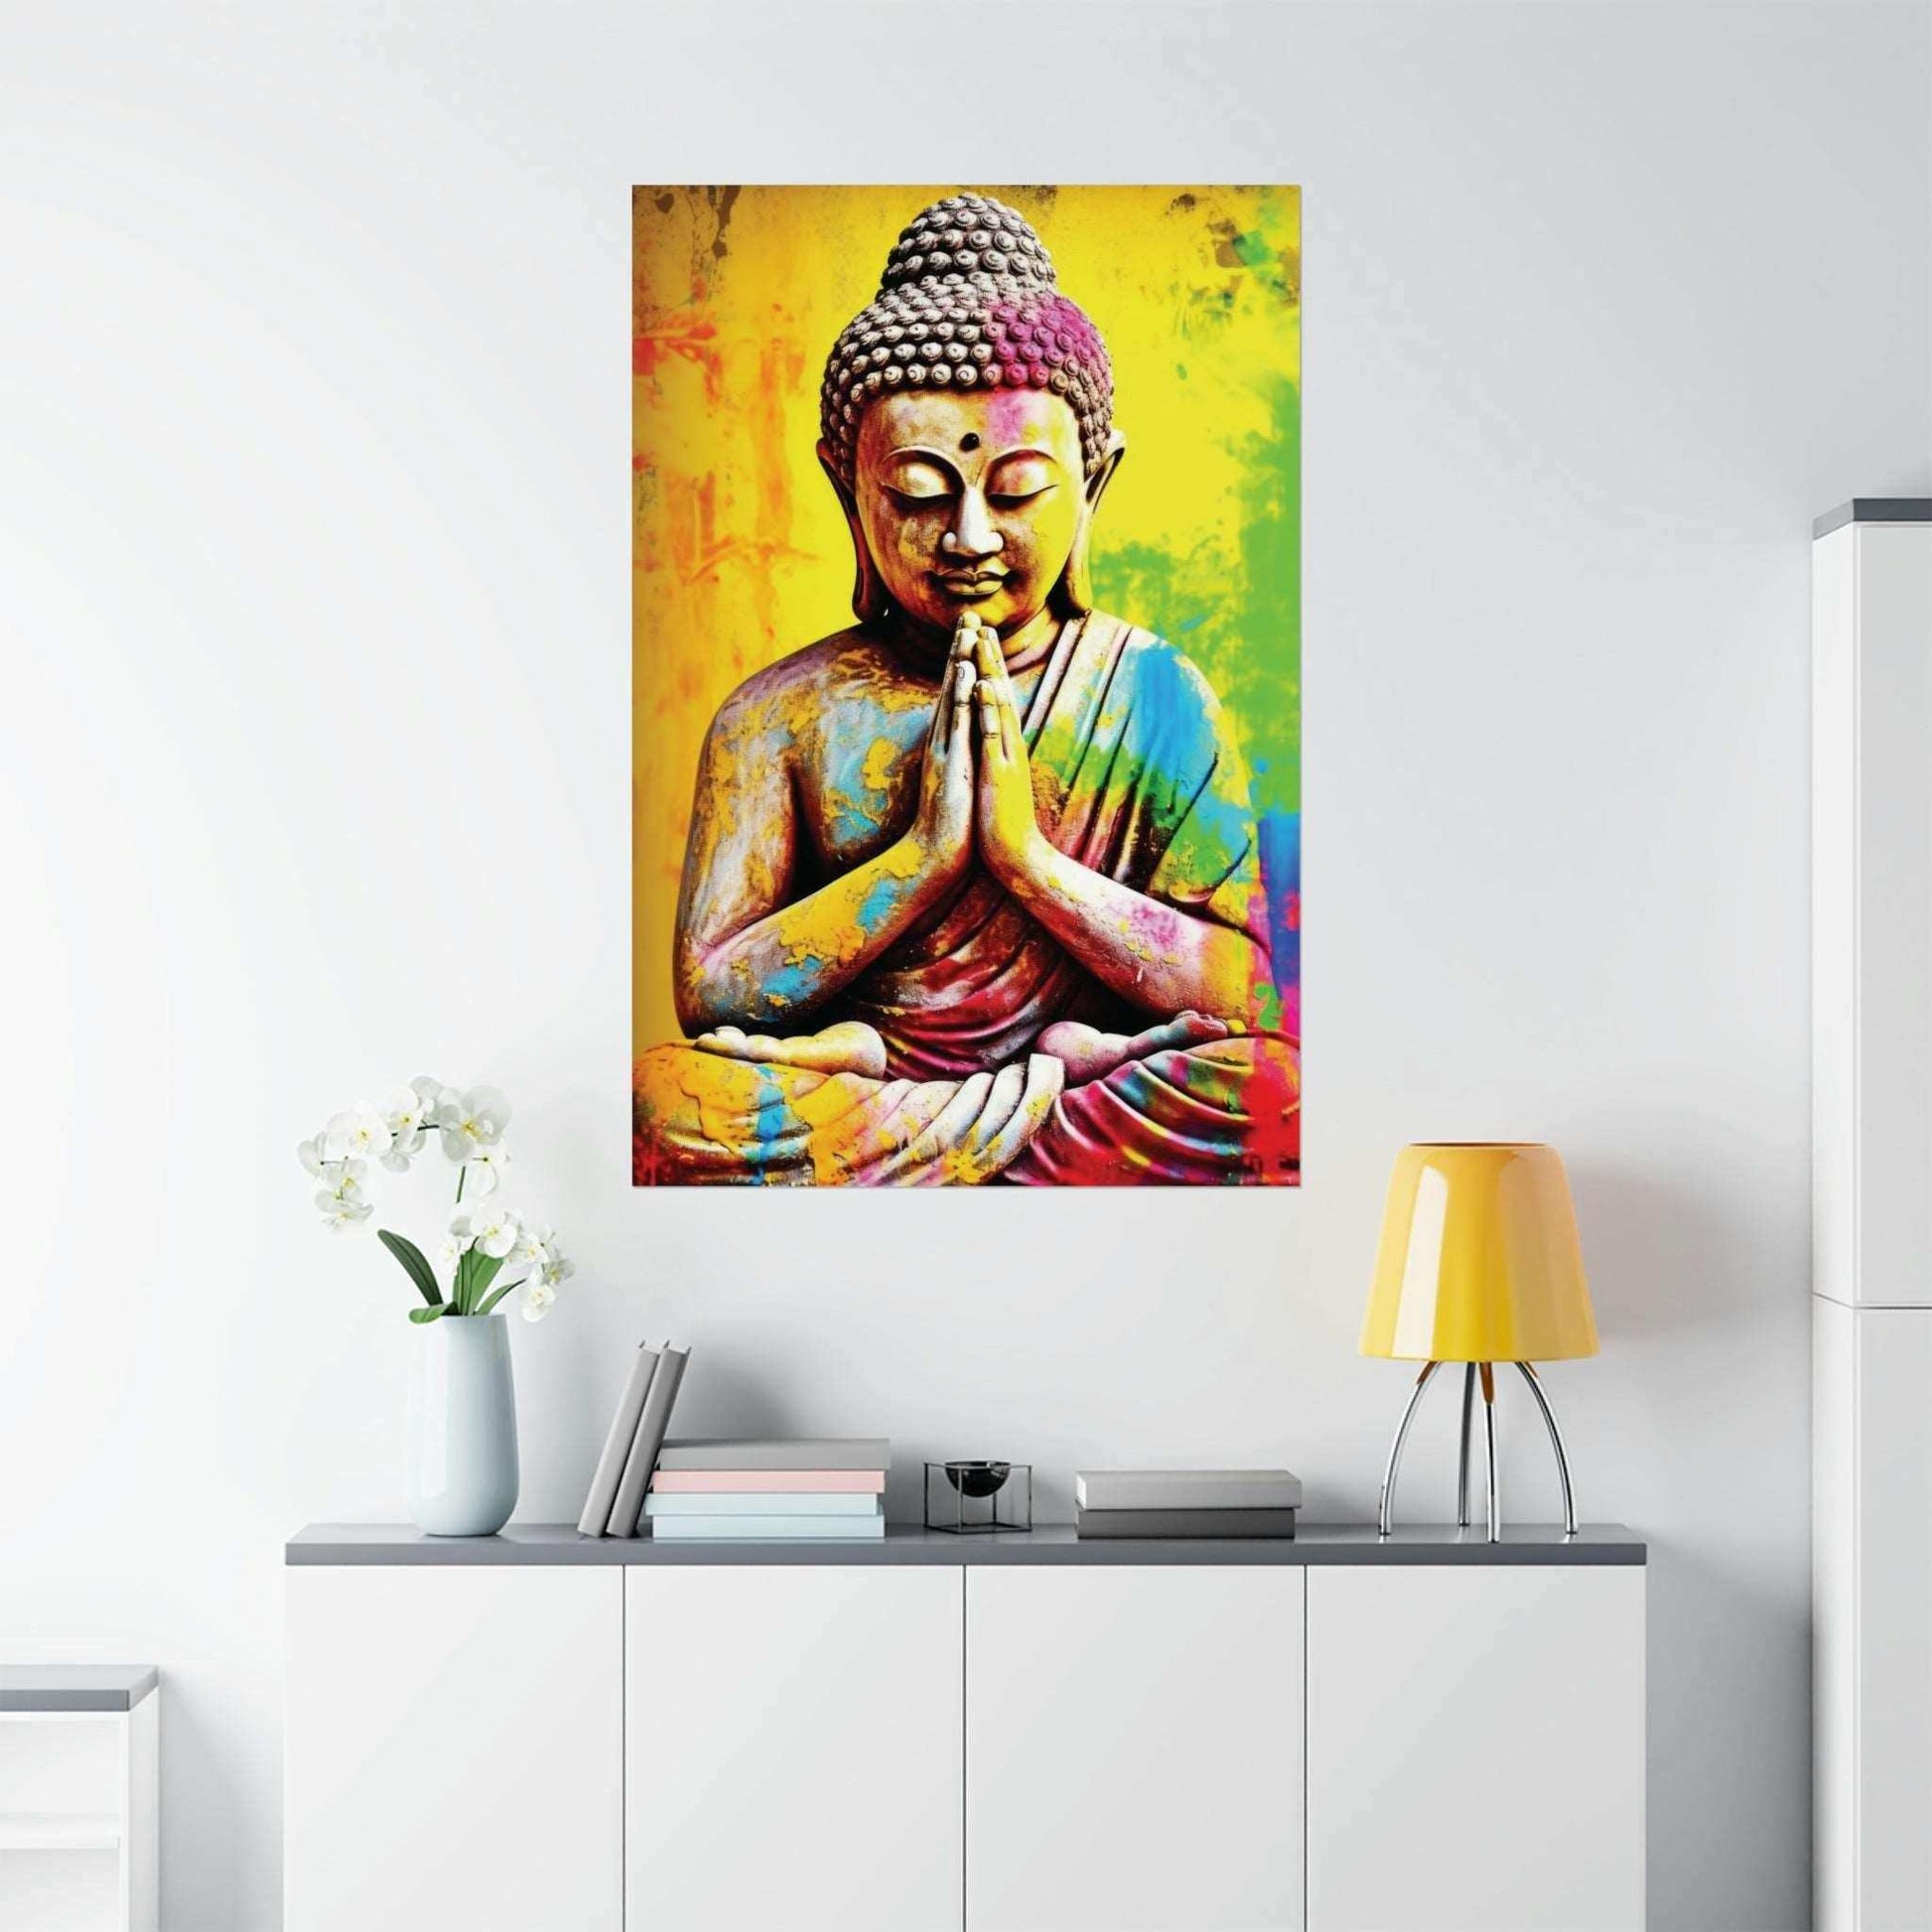 Colourful Buddha Artwork in a meditative pose with a rainbow of colors on matte finish paper, encapsulating cultural artistry.